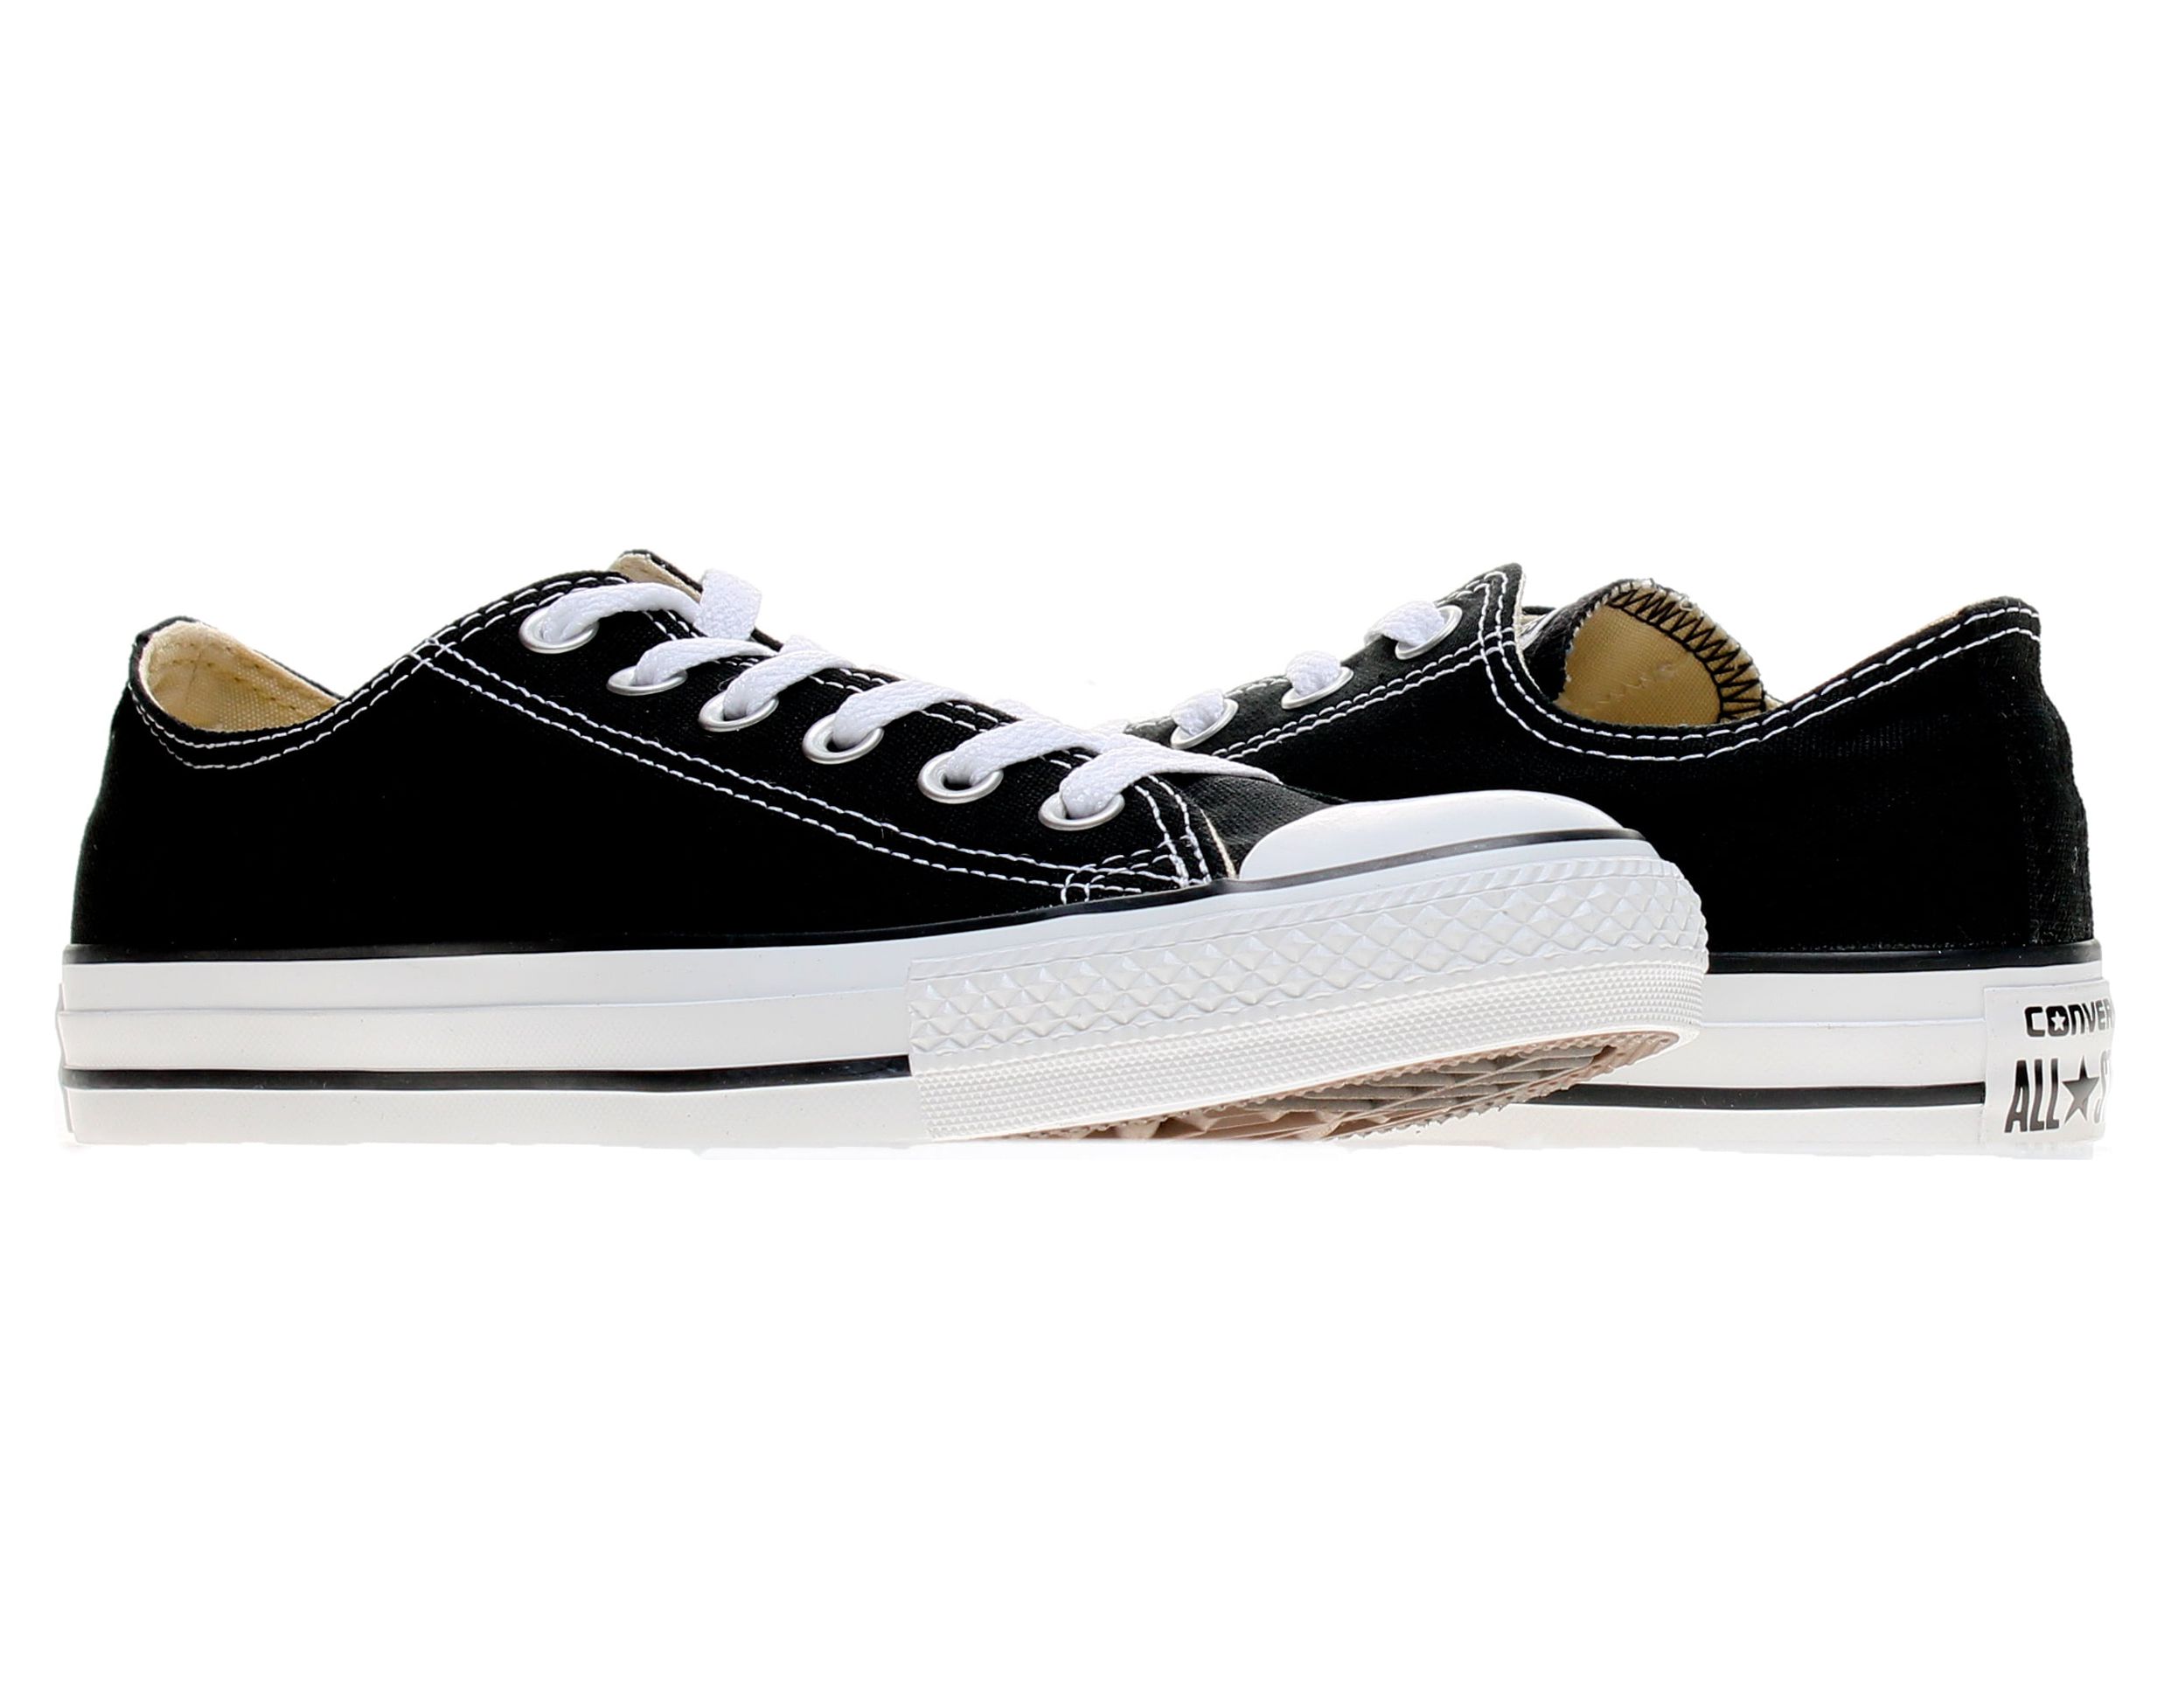 Unisex Chuck Taylor All Star Lo - image 1 of 6